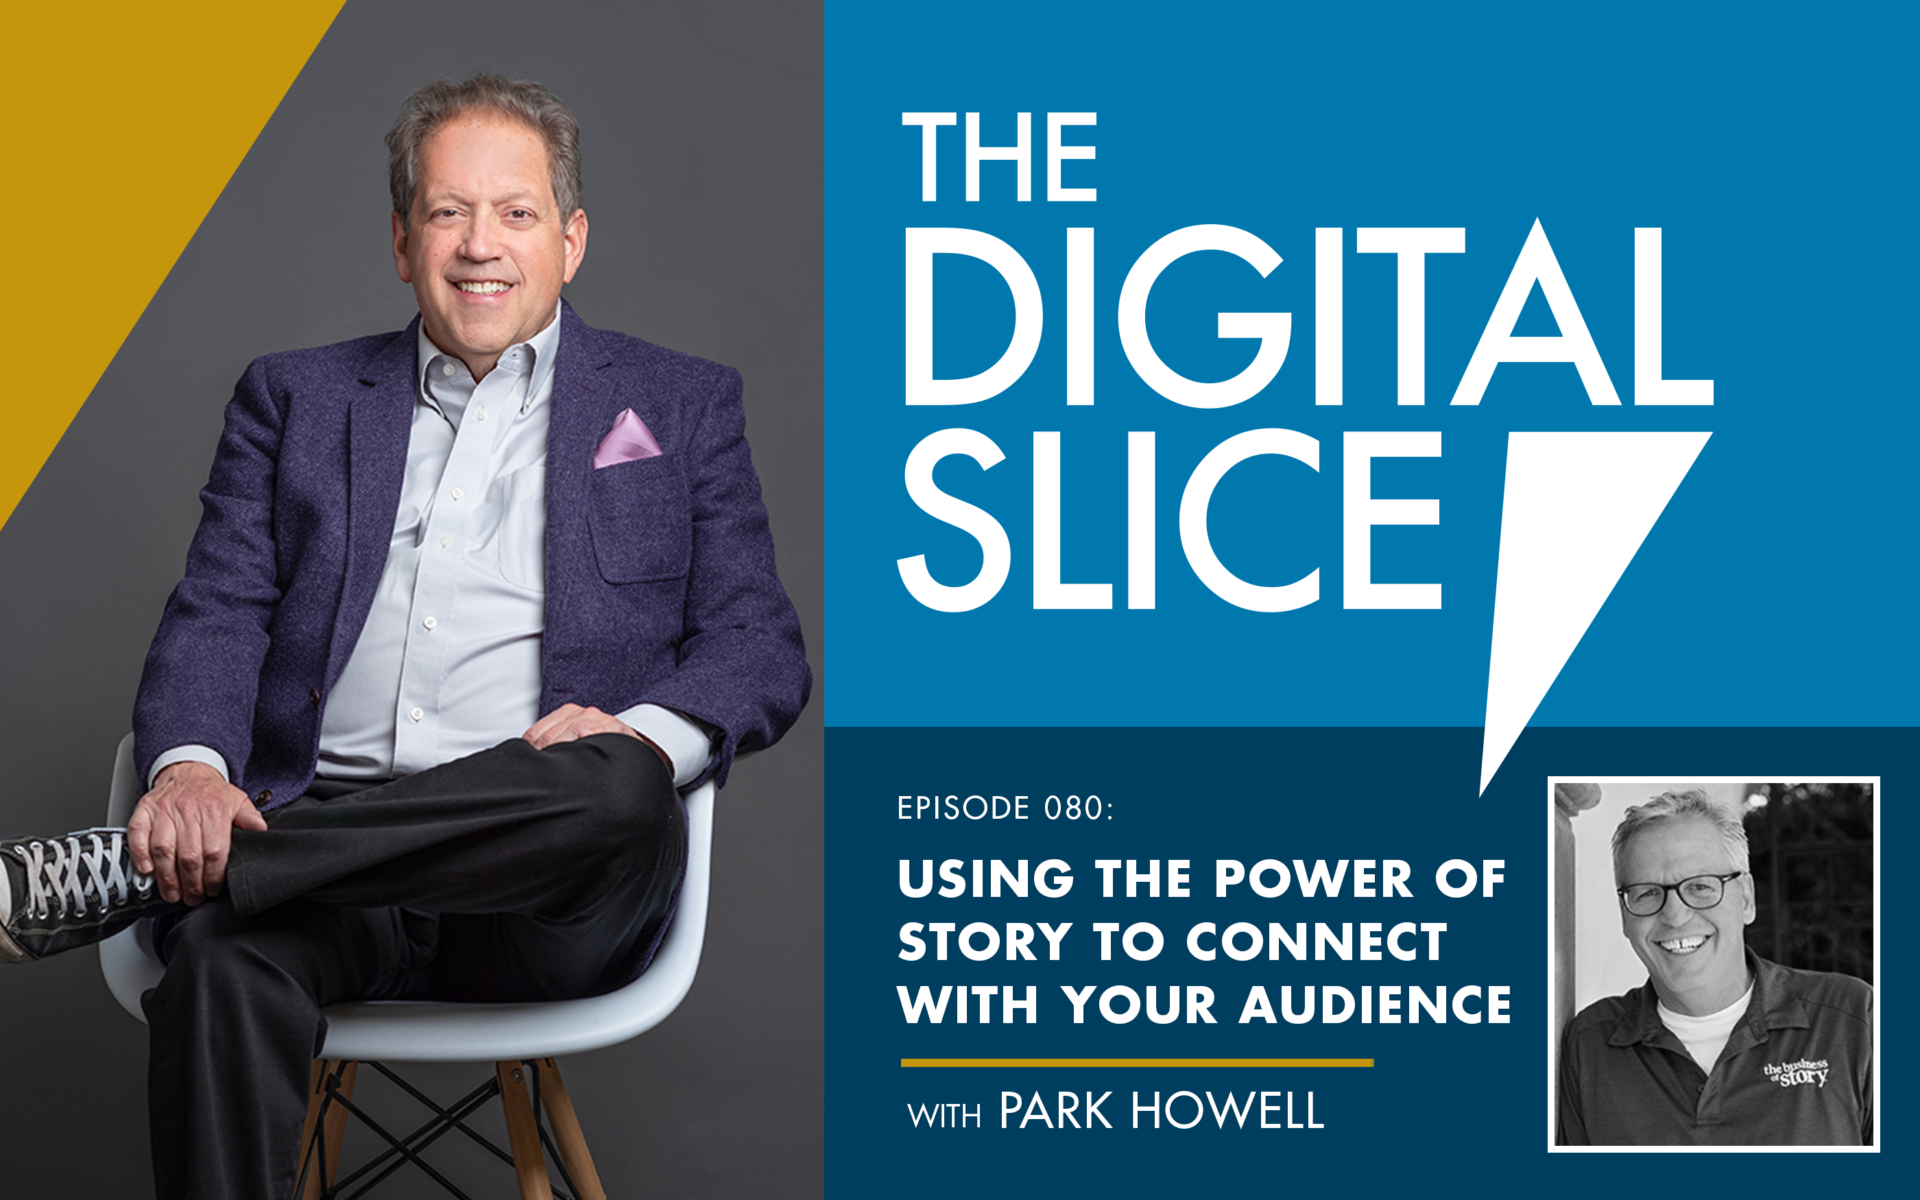 [PODCAST] Using The Power Of Story To Connect With Your Audience